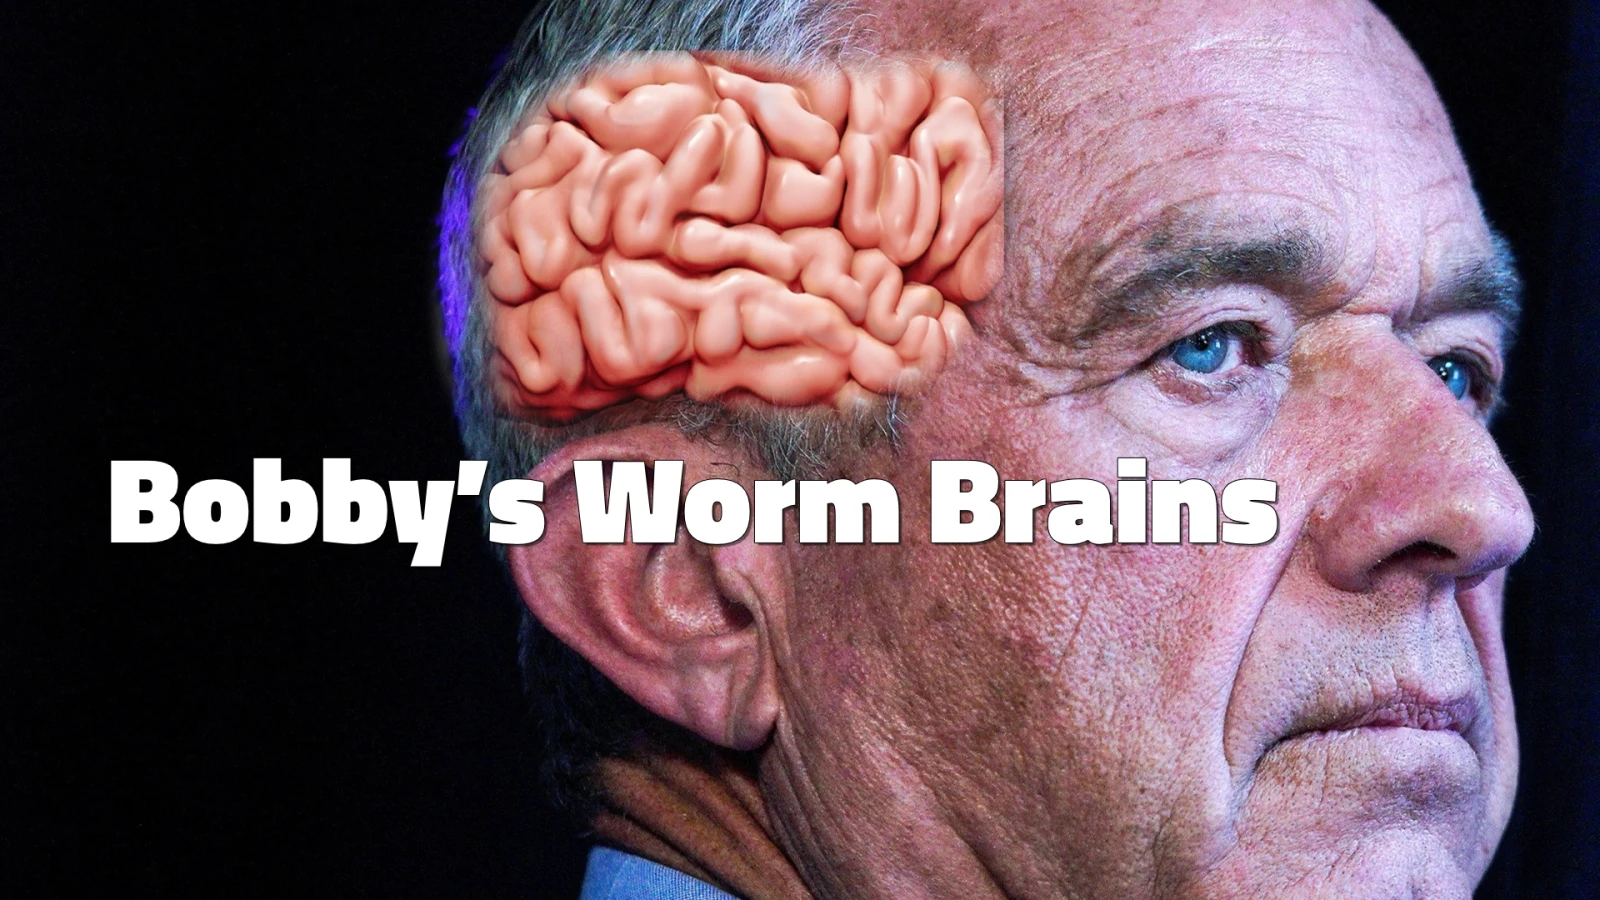 Bobby Worm Brains - Featured image